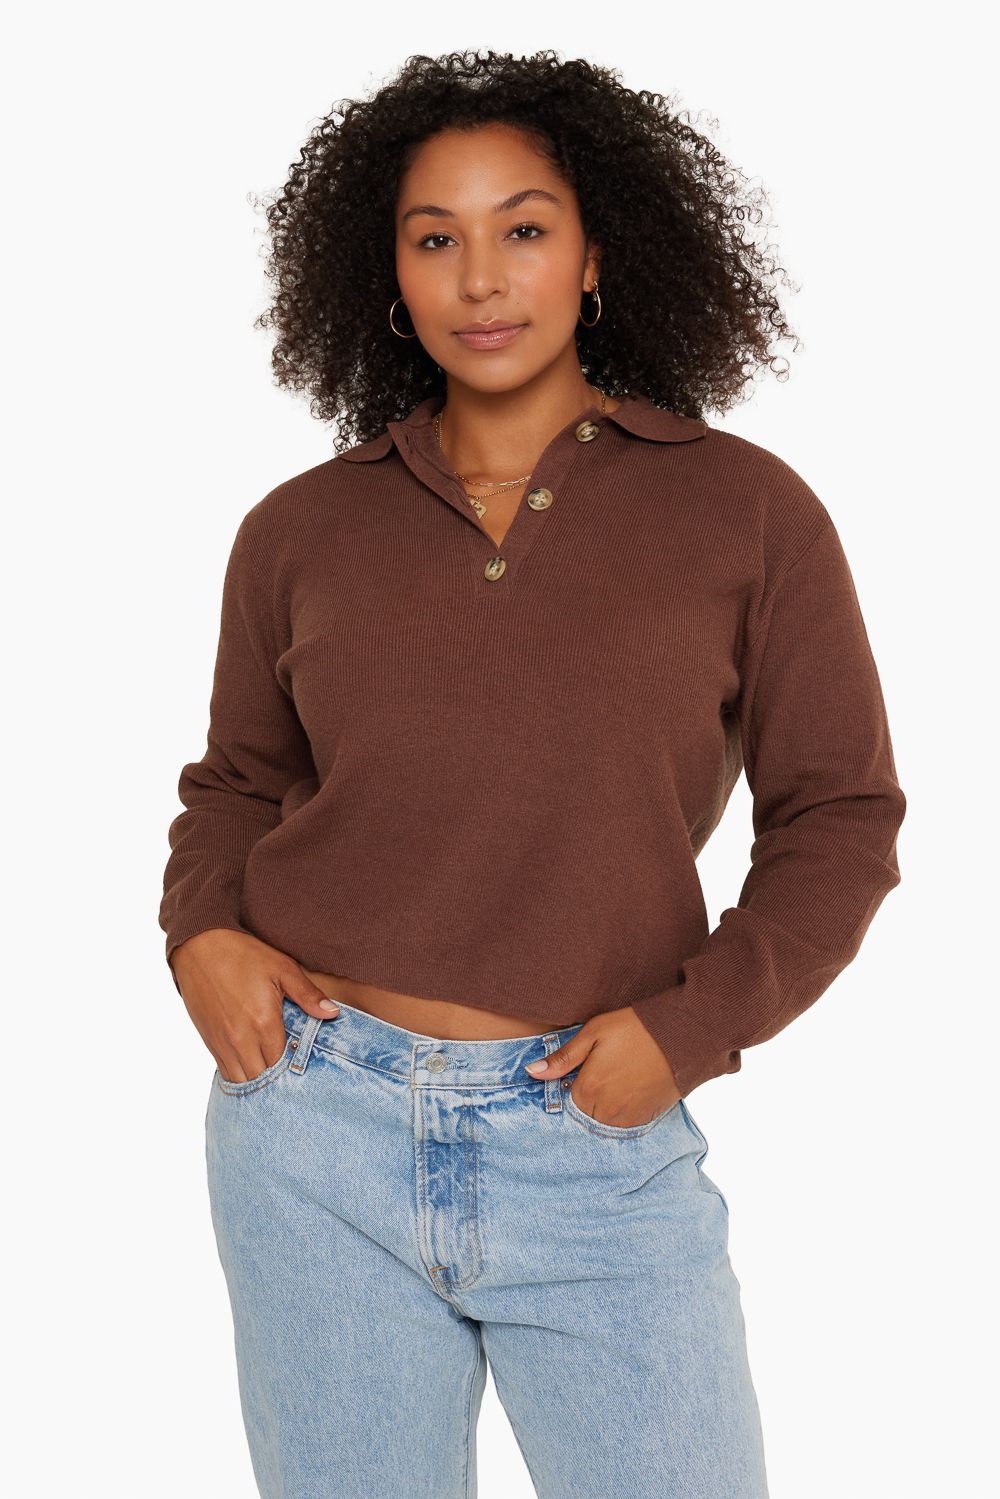 SET™ POLO PULLOVER IN CHOCOLATE